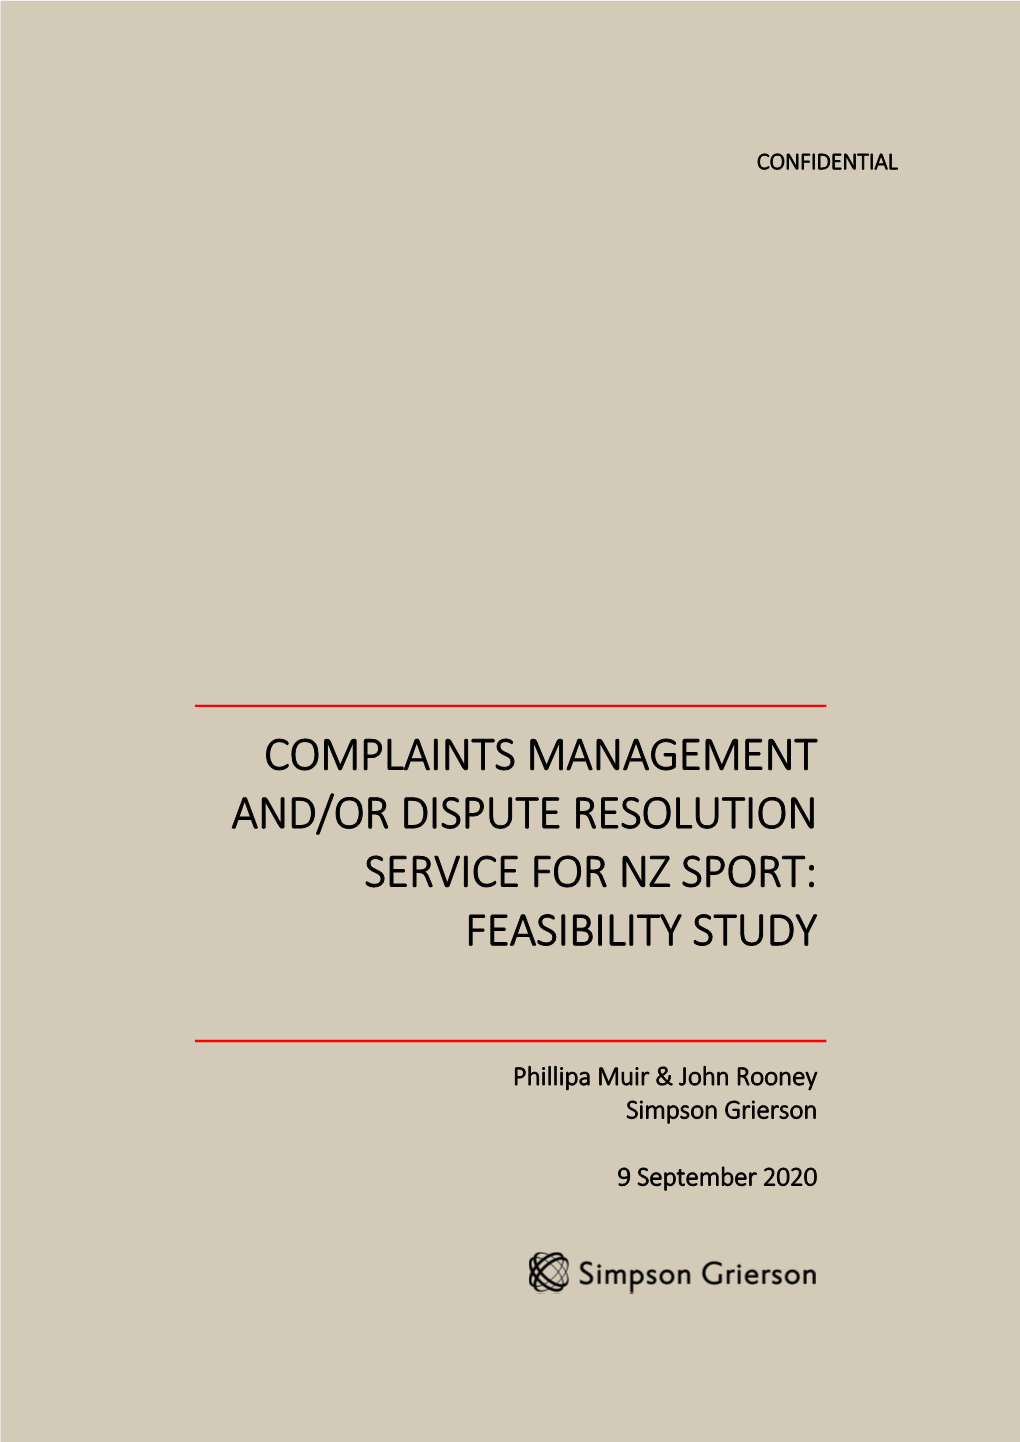 Complaints Management And/Or Dispute Resolution Service for Nz Sport: Feasibility Study